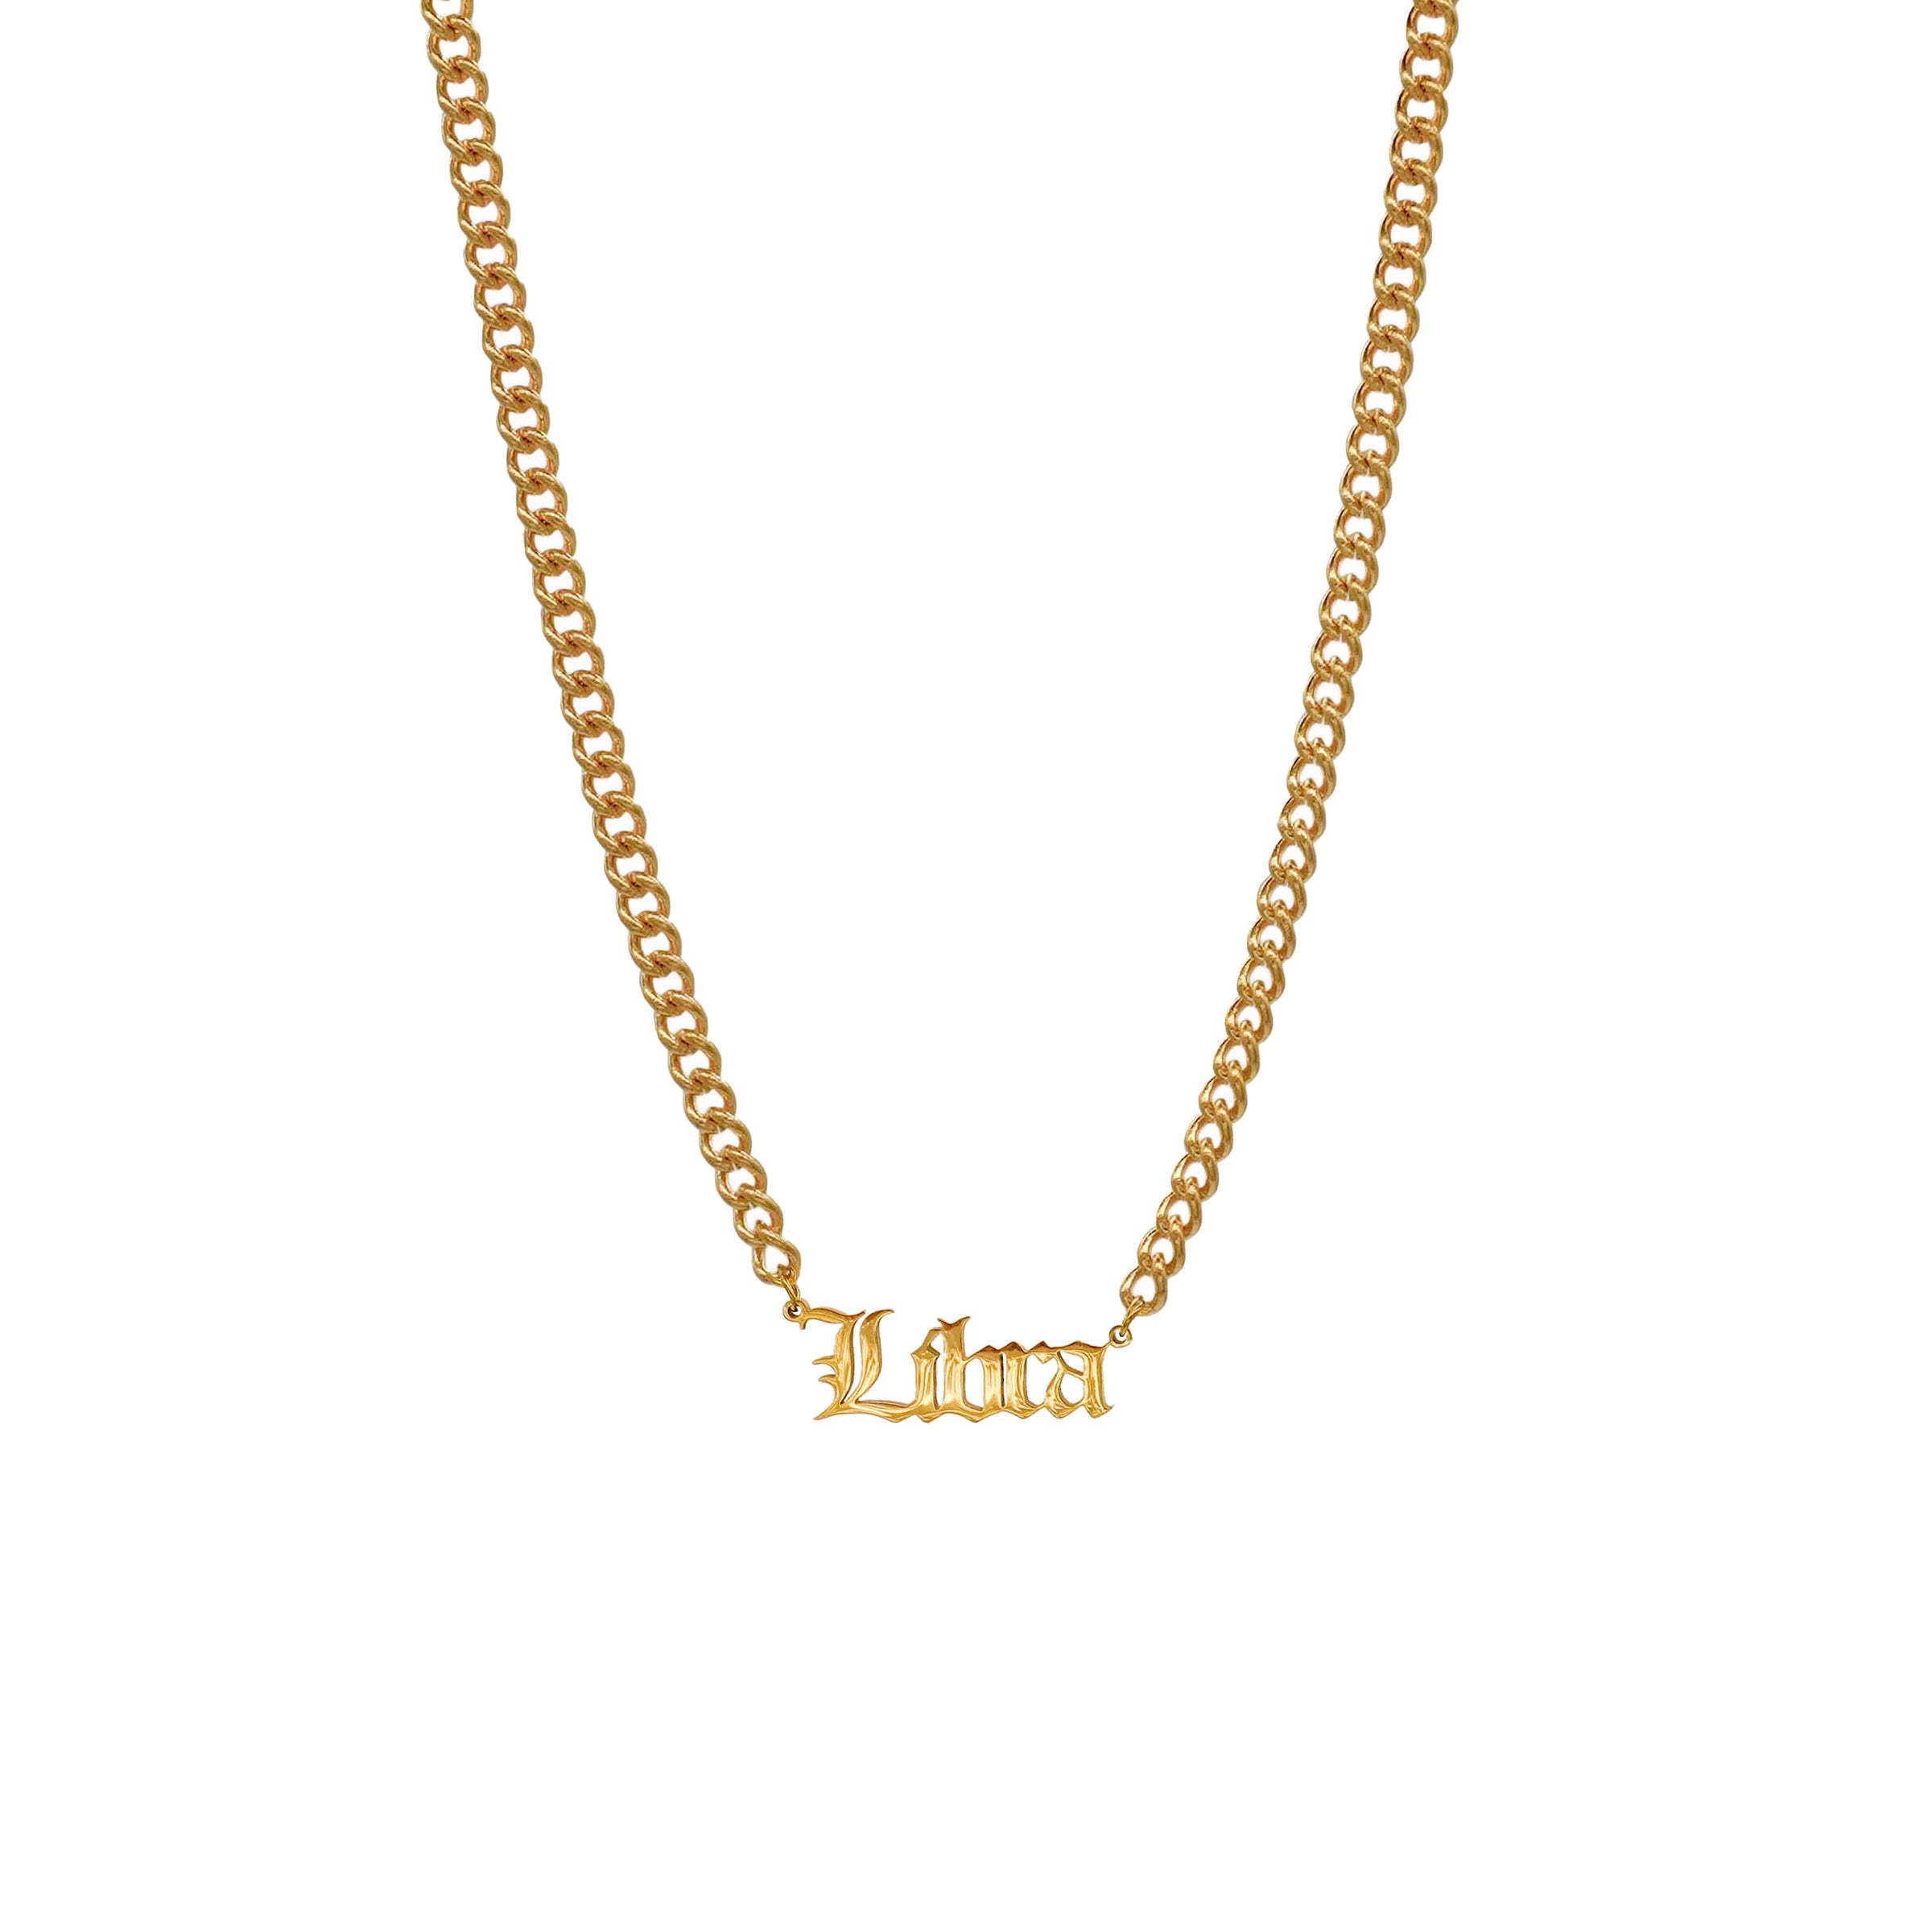 Starborn Patterns 18k Gold Plated Stainless Steel Zodiac Sign Astrology Cuban Chain Link Necklace Choker with Libra Old English Font Charm